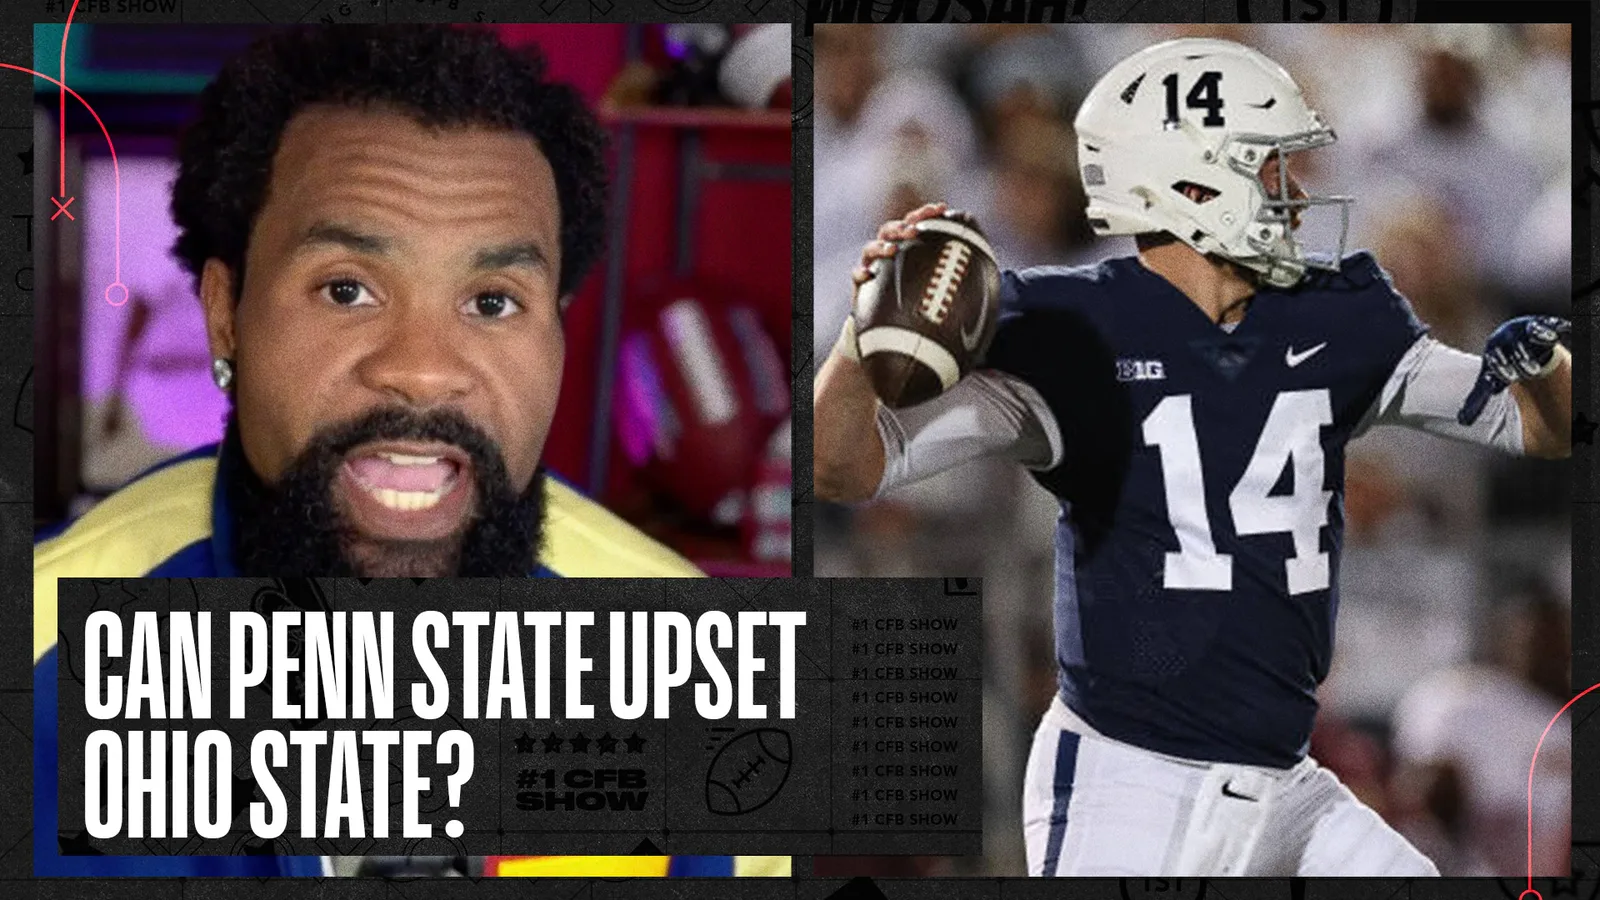 Can Penn State upset Ohio State?